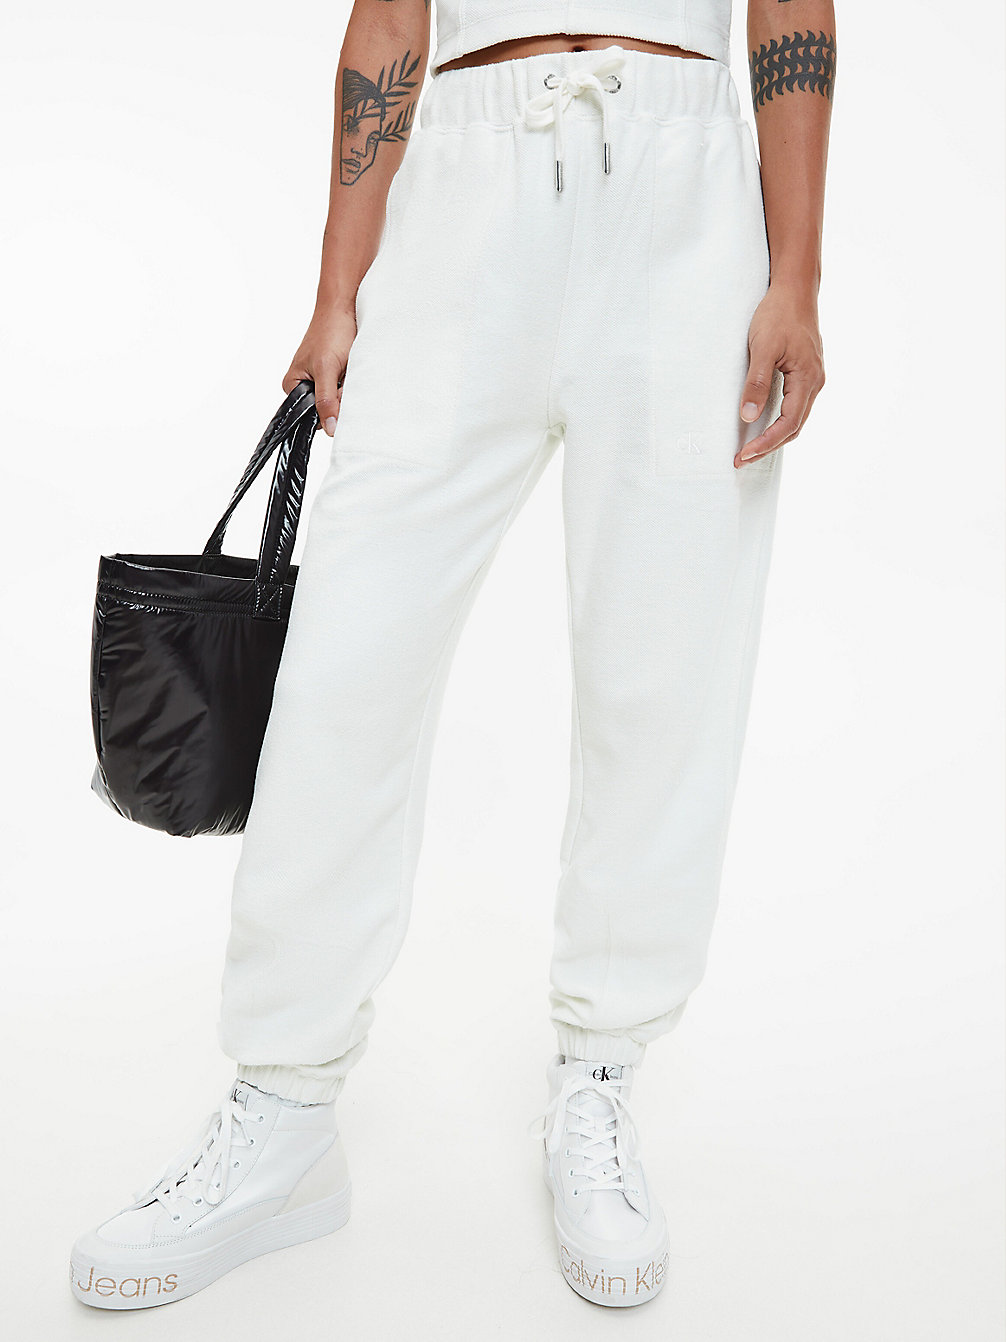 IVORY Cotton Terry Joggers undefined women Calvin Klein